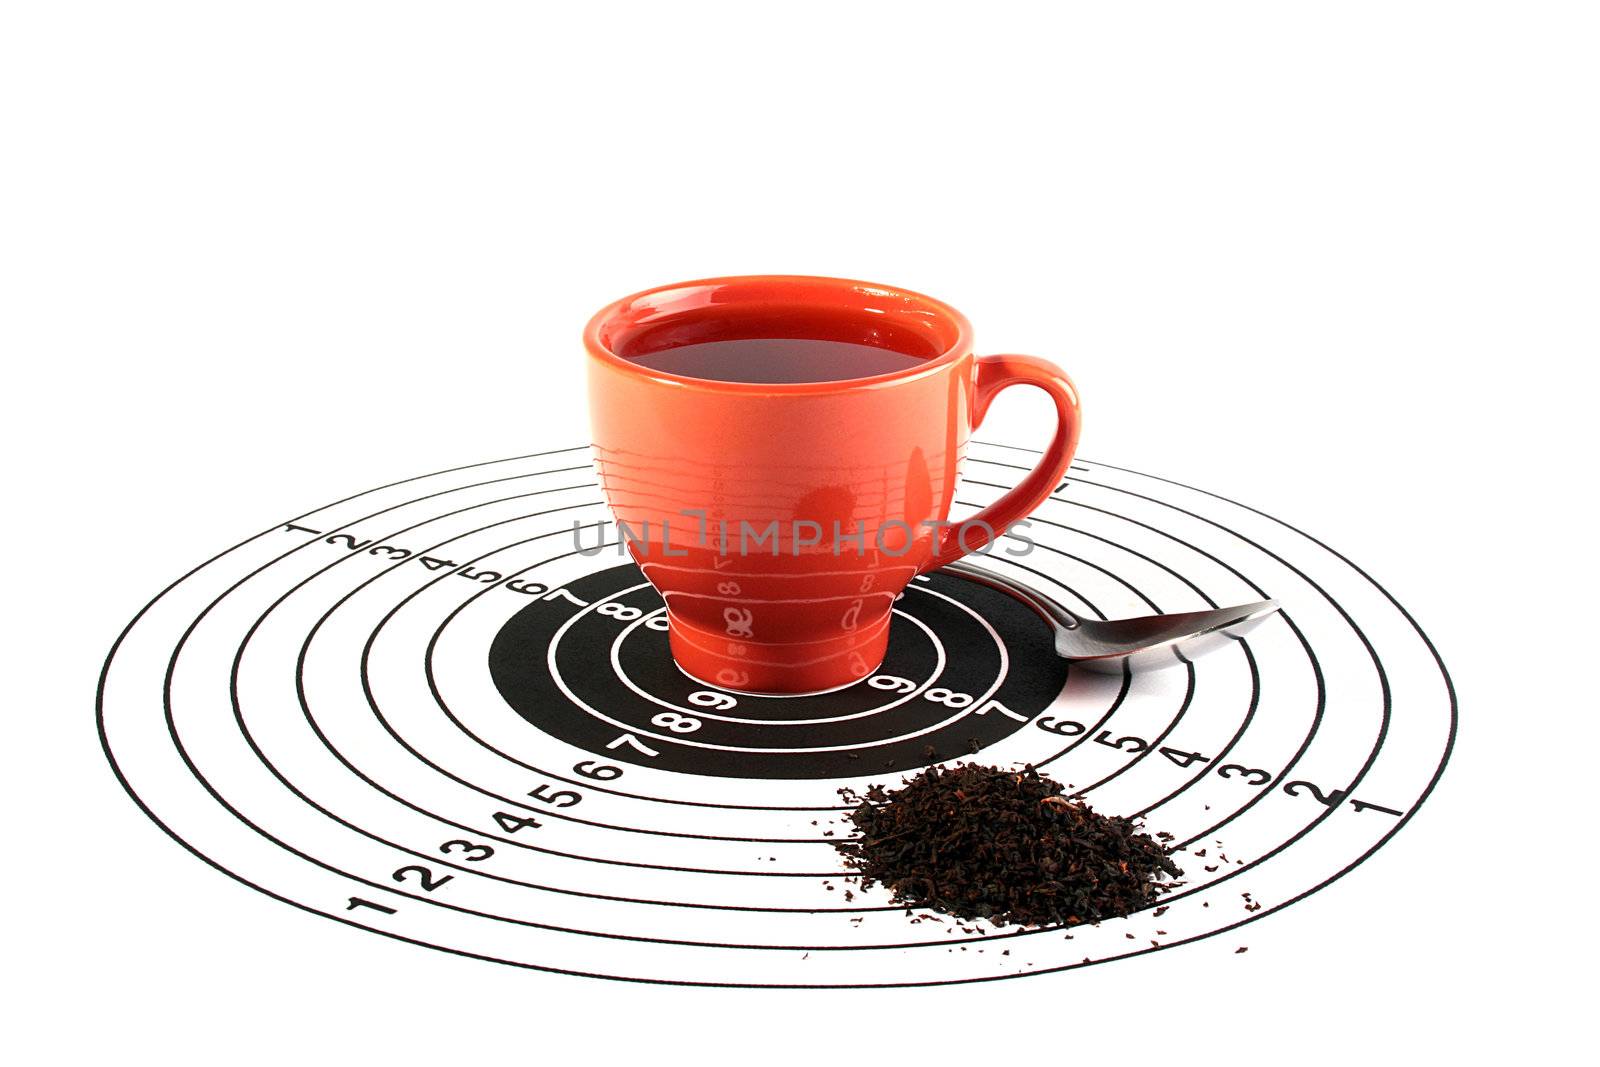 The red cup with tea is in the centre of a target for accuracy training, nearby there is a teaspoon and tea leaves are scattered. The creative with idea tea - hit in the purpose, tea is your choice.